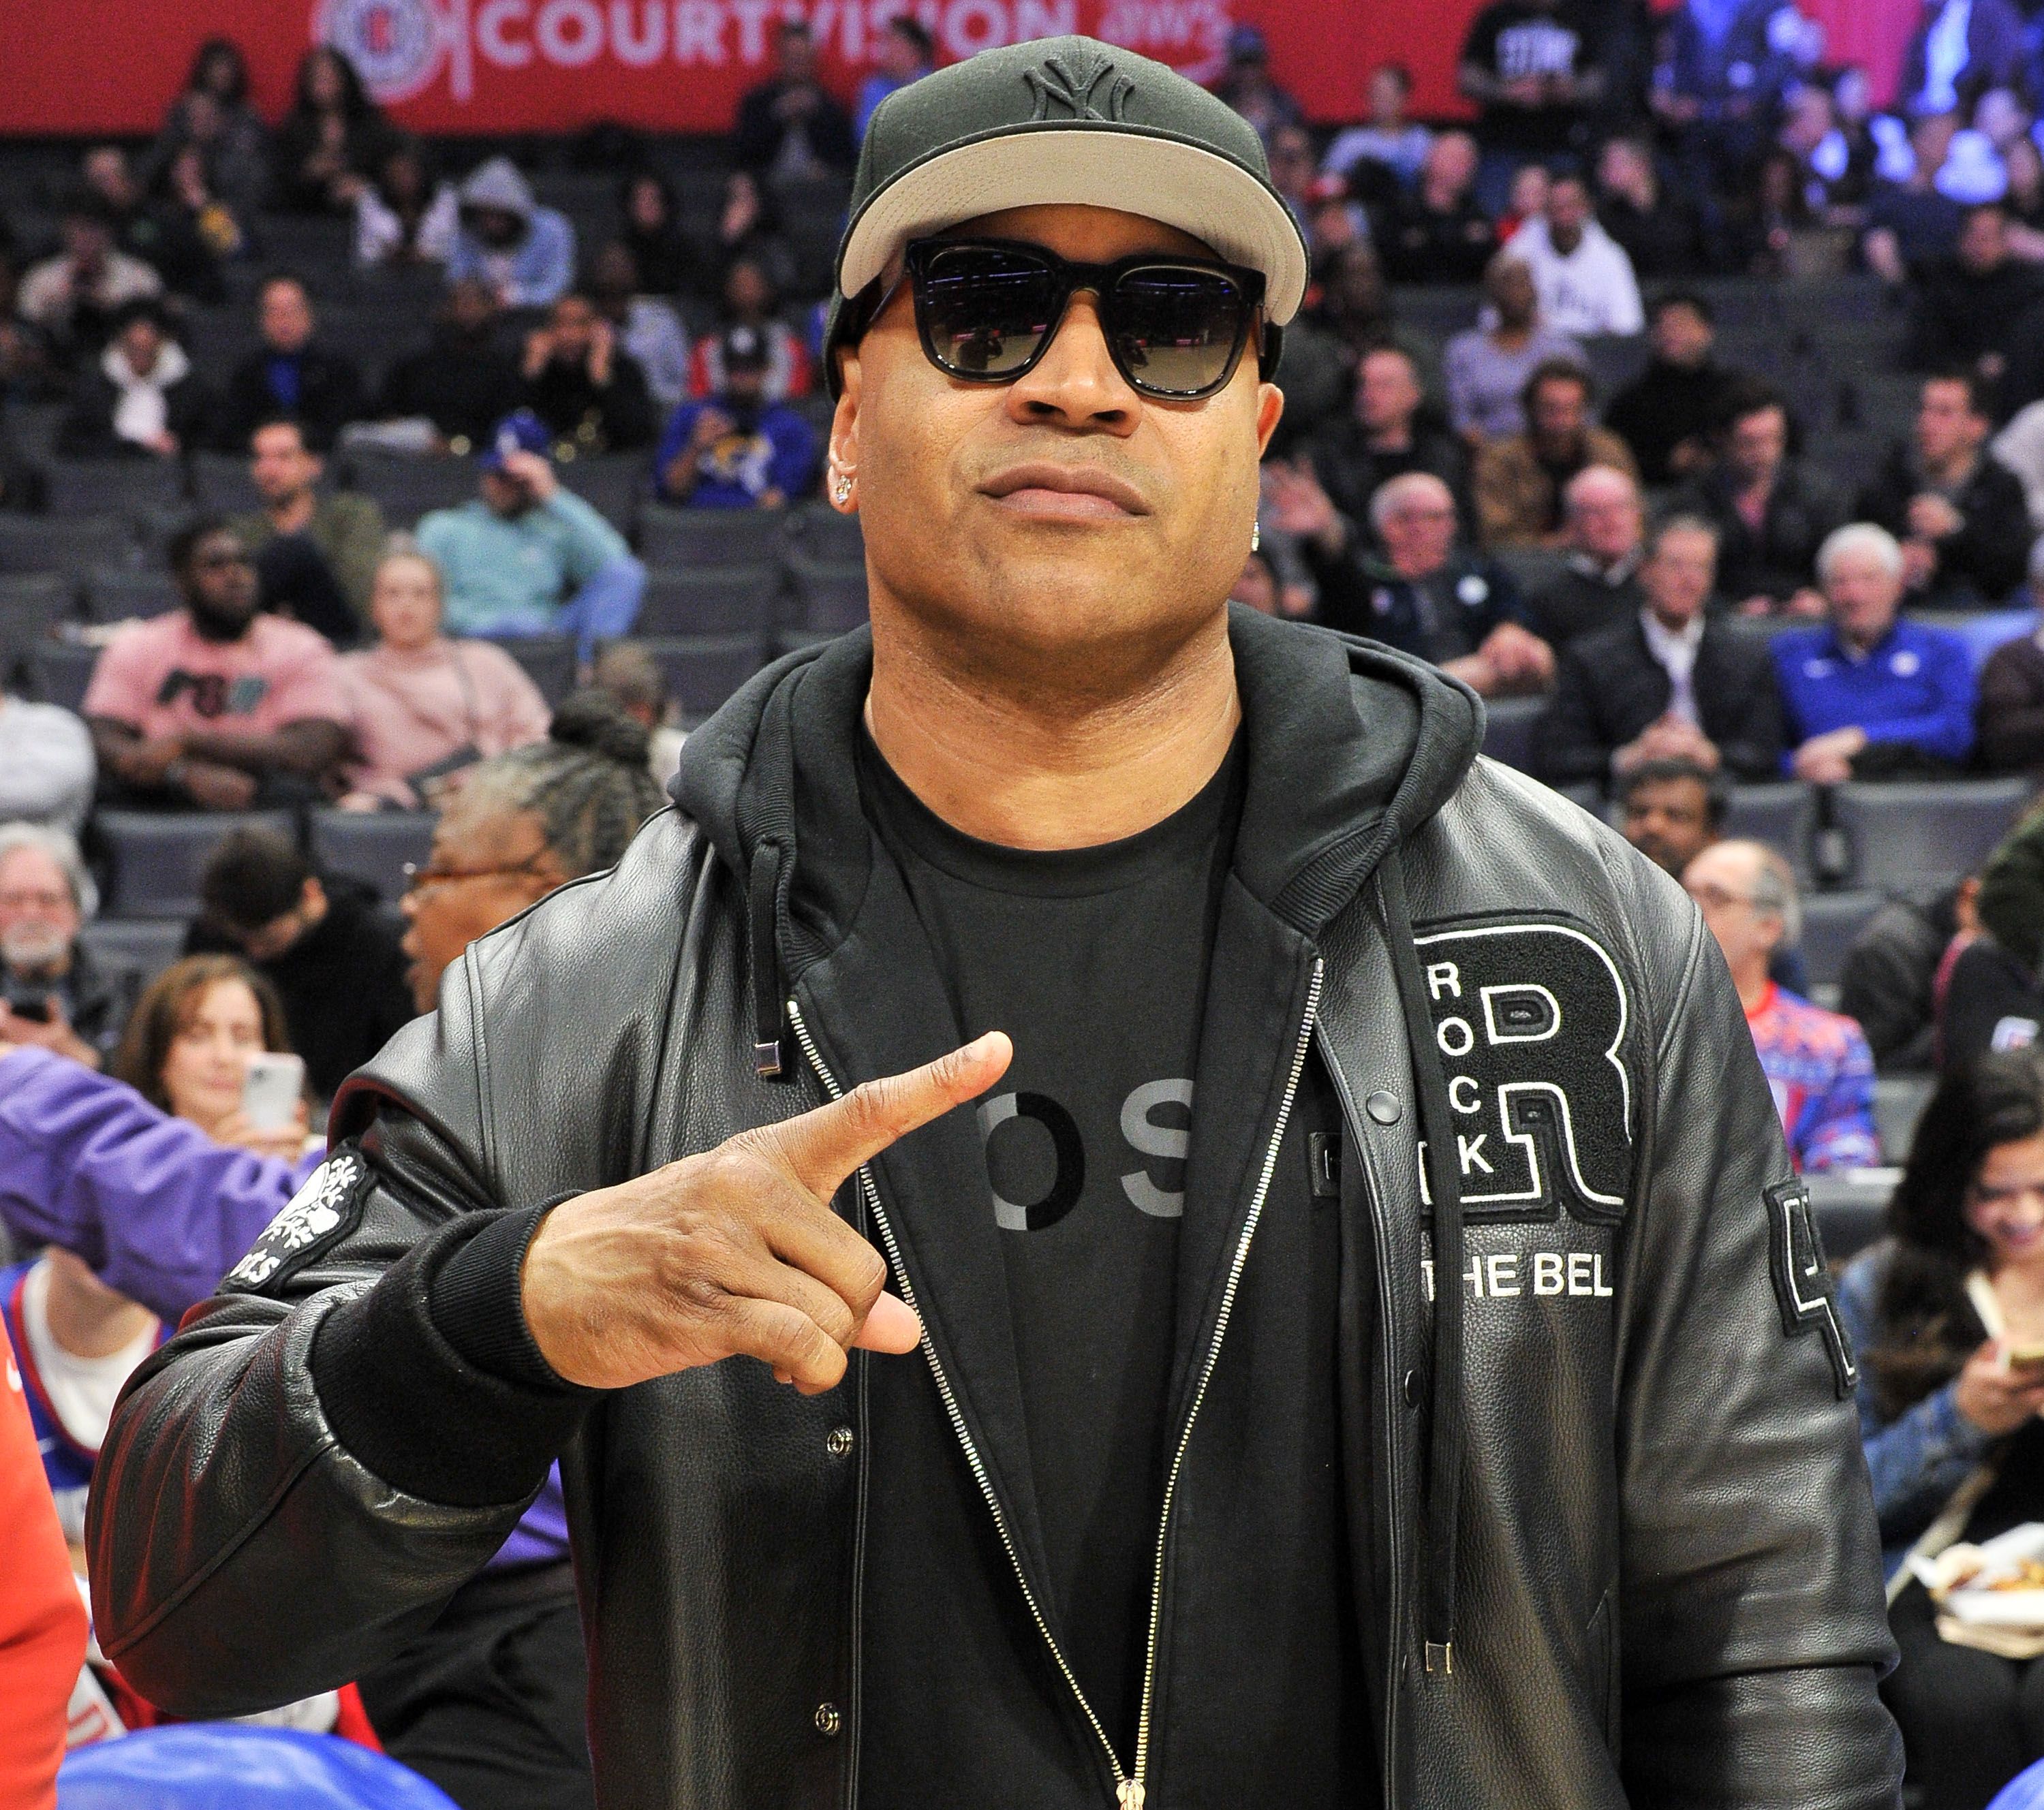 LL Cool J at a basketball game on December 17, 2019 in Los Angeles. | Photo : Getty Images